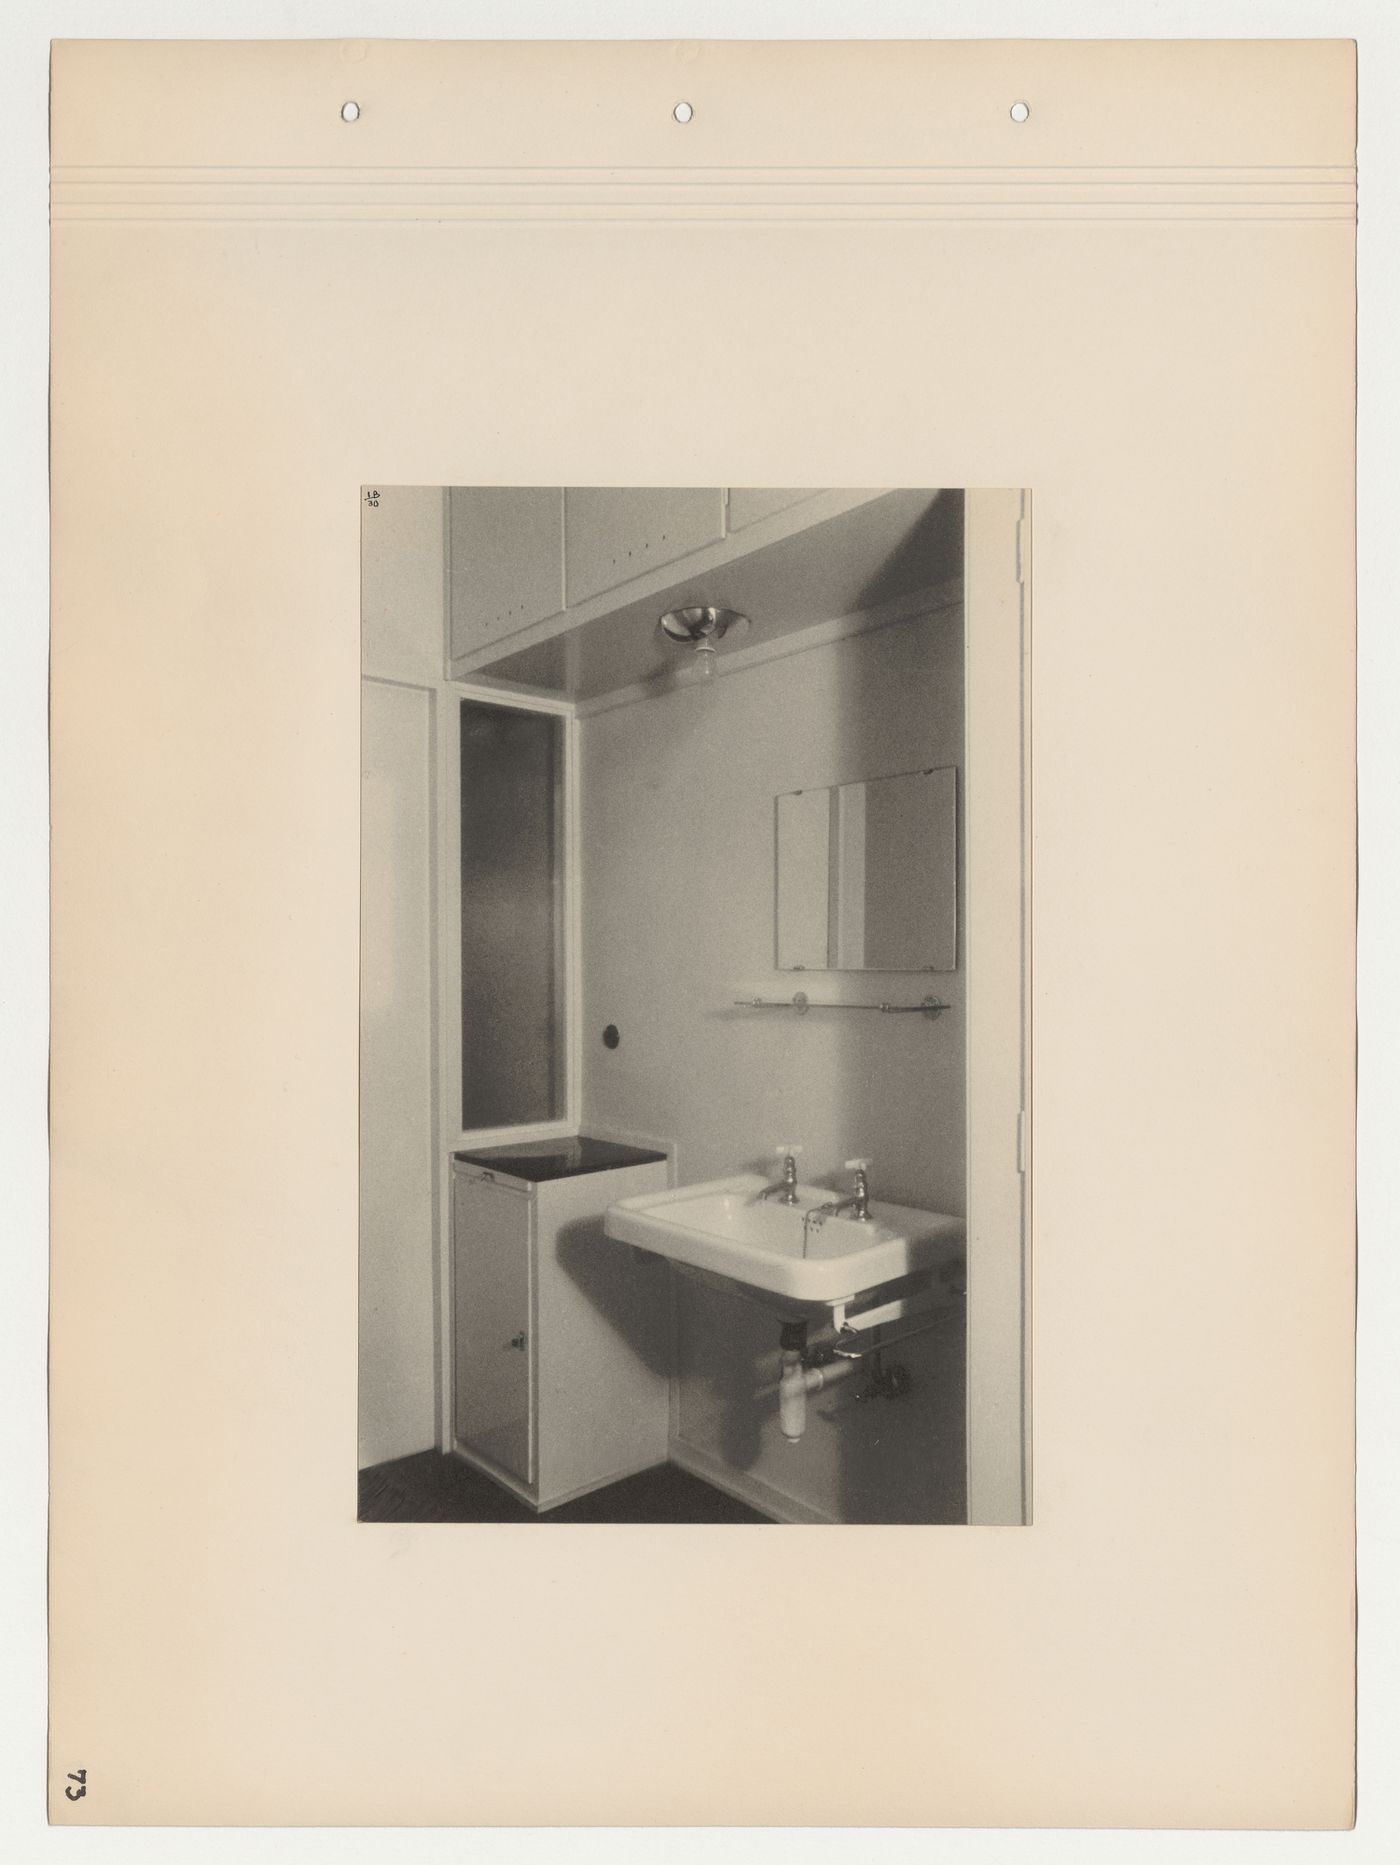 Interior view of an apartment kitchenette sink, Budge Foundation Old People's Home, Frankfurt am Main, Germany